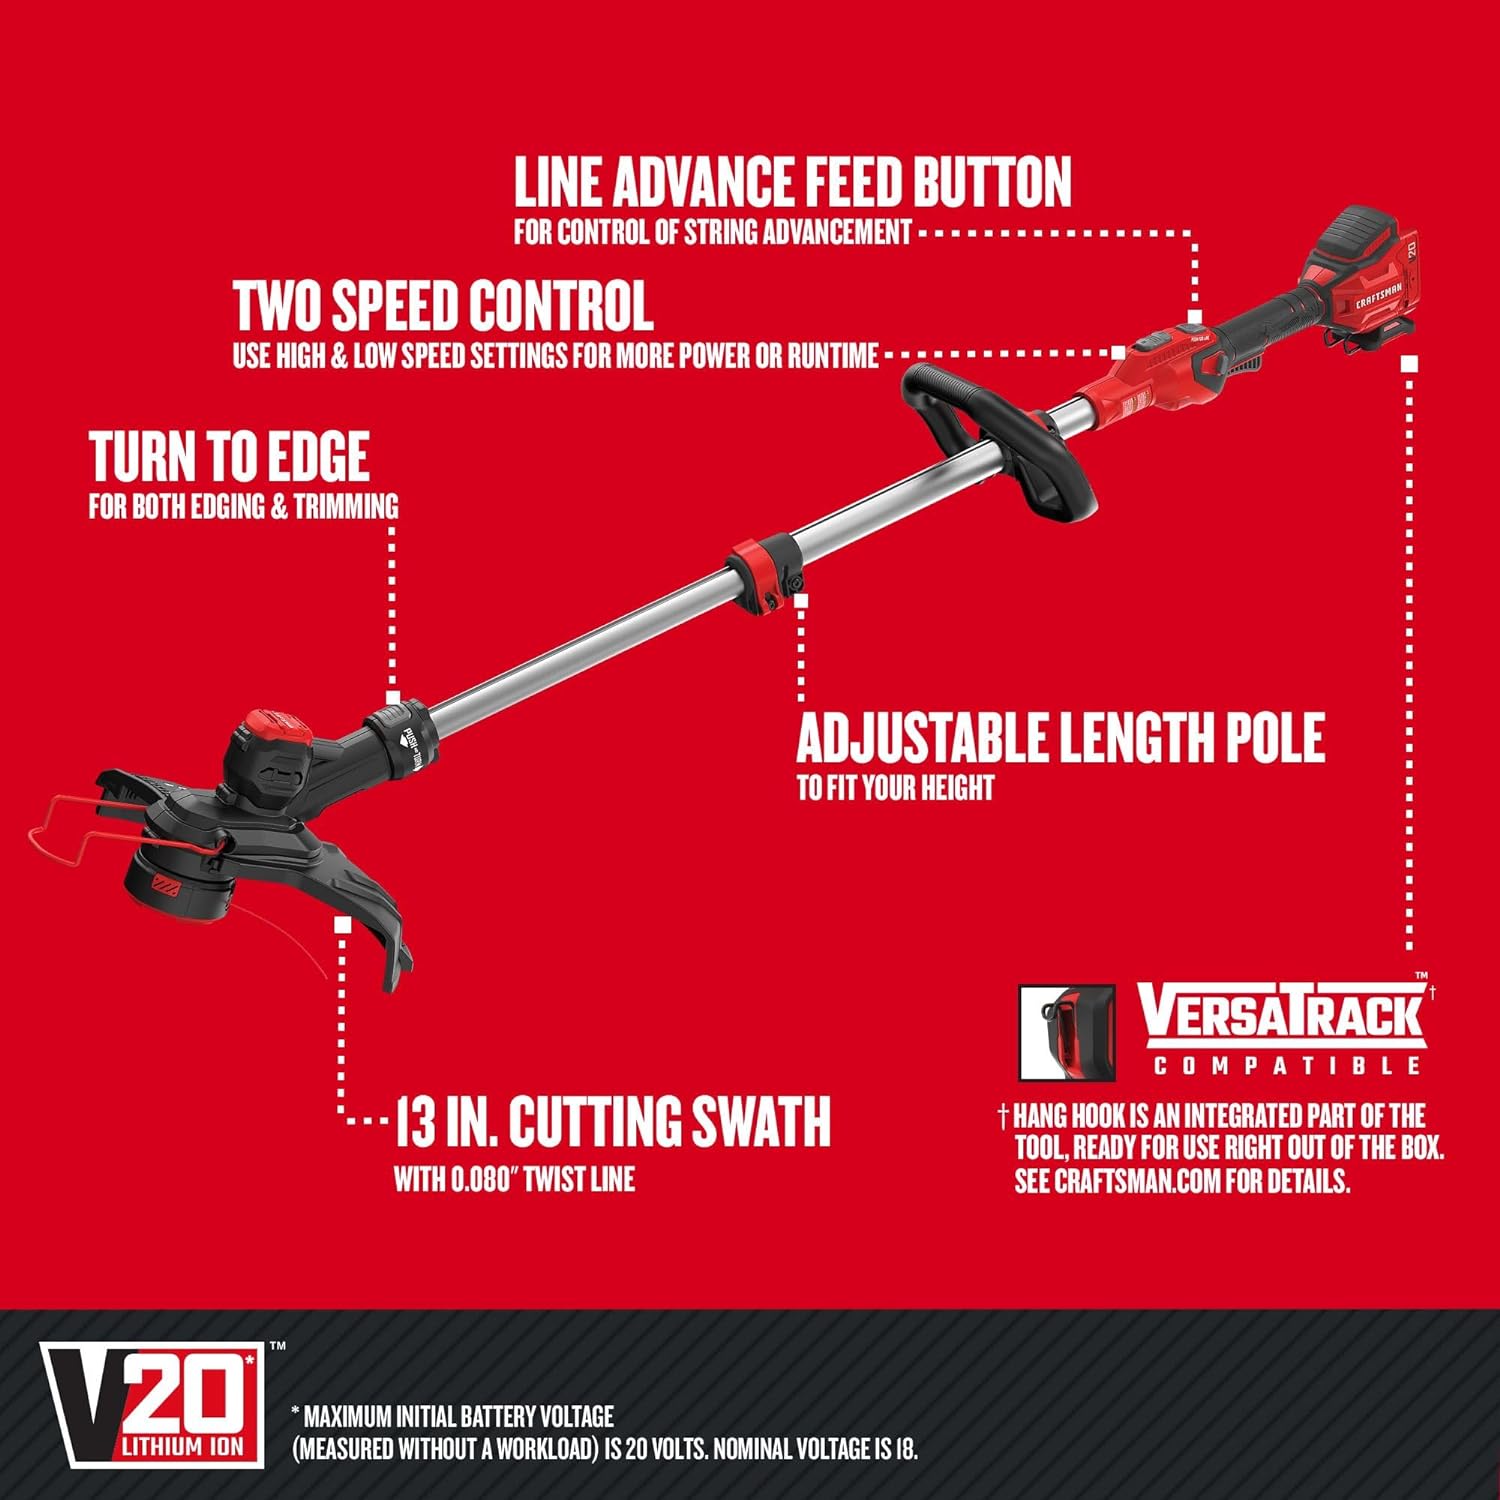 CRAFTSMAN 20V Cordless String Trimmer and Lawn Edger, Tool Only (CMCST910B)